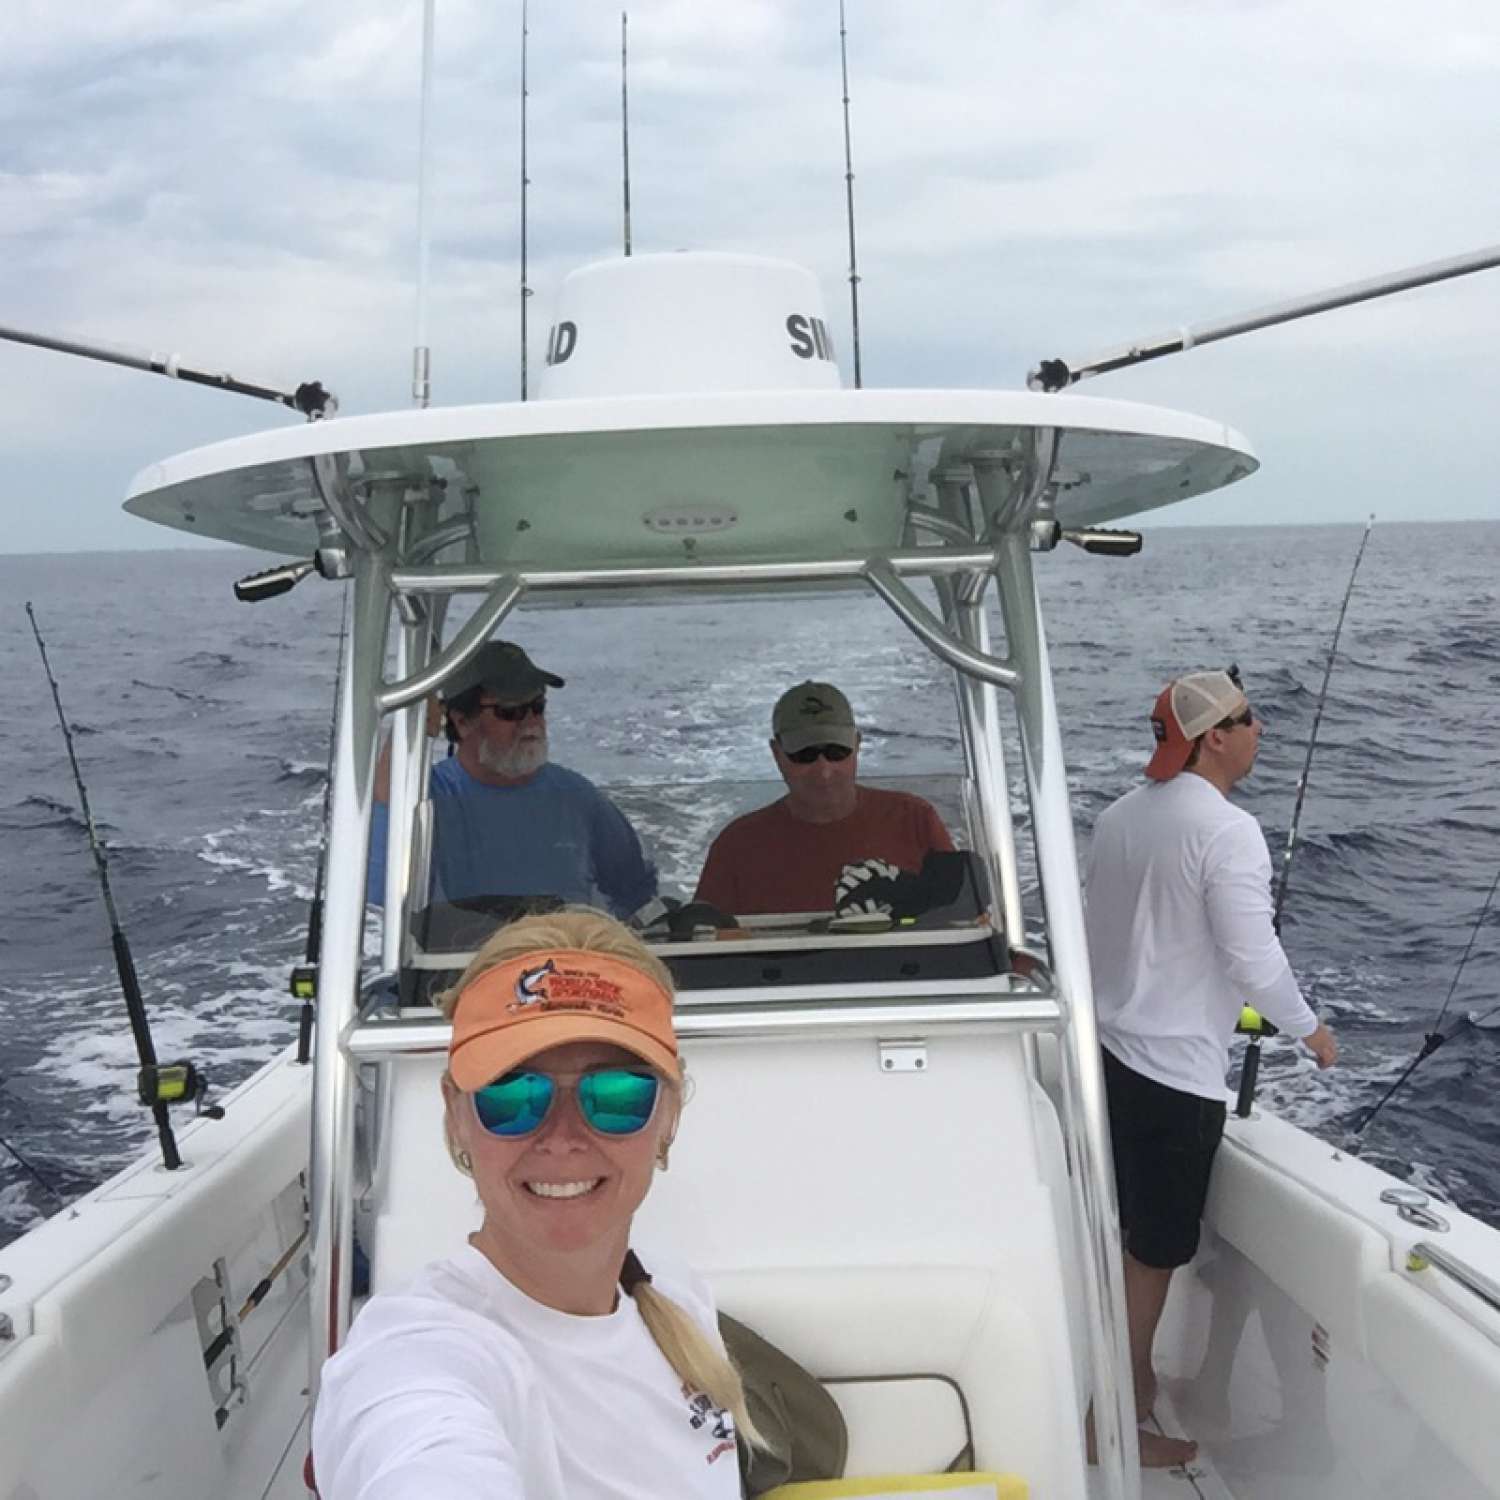 This photo is from our first offshore fishing trip in the 252 open taken in Islamorada, FL. We are out...